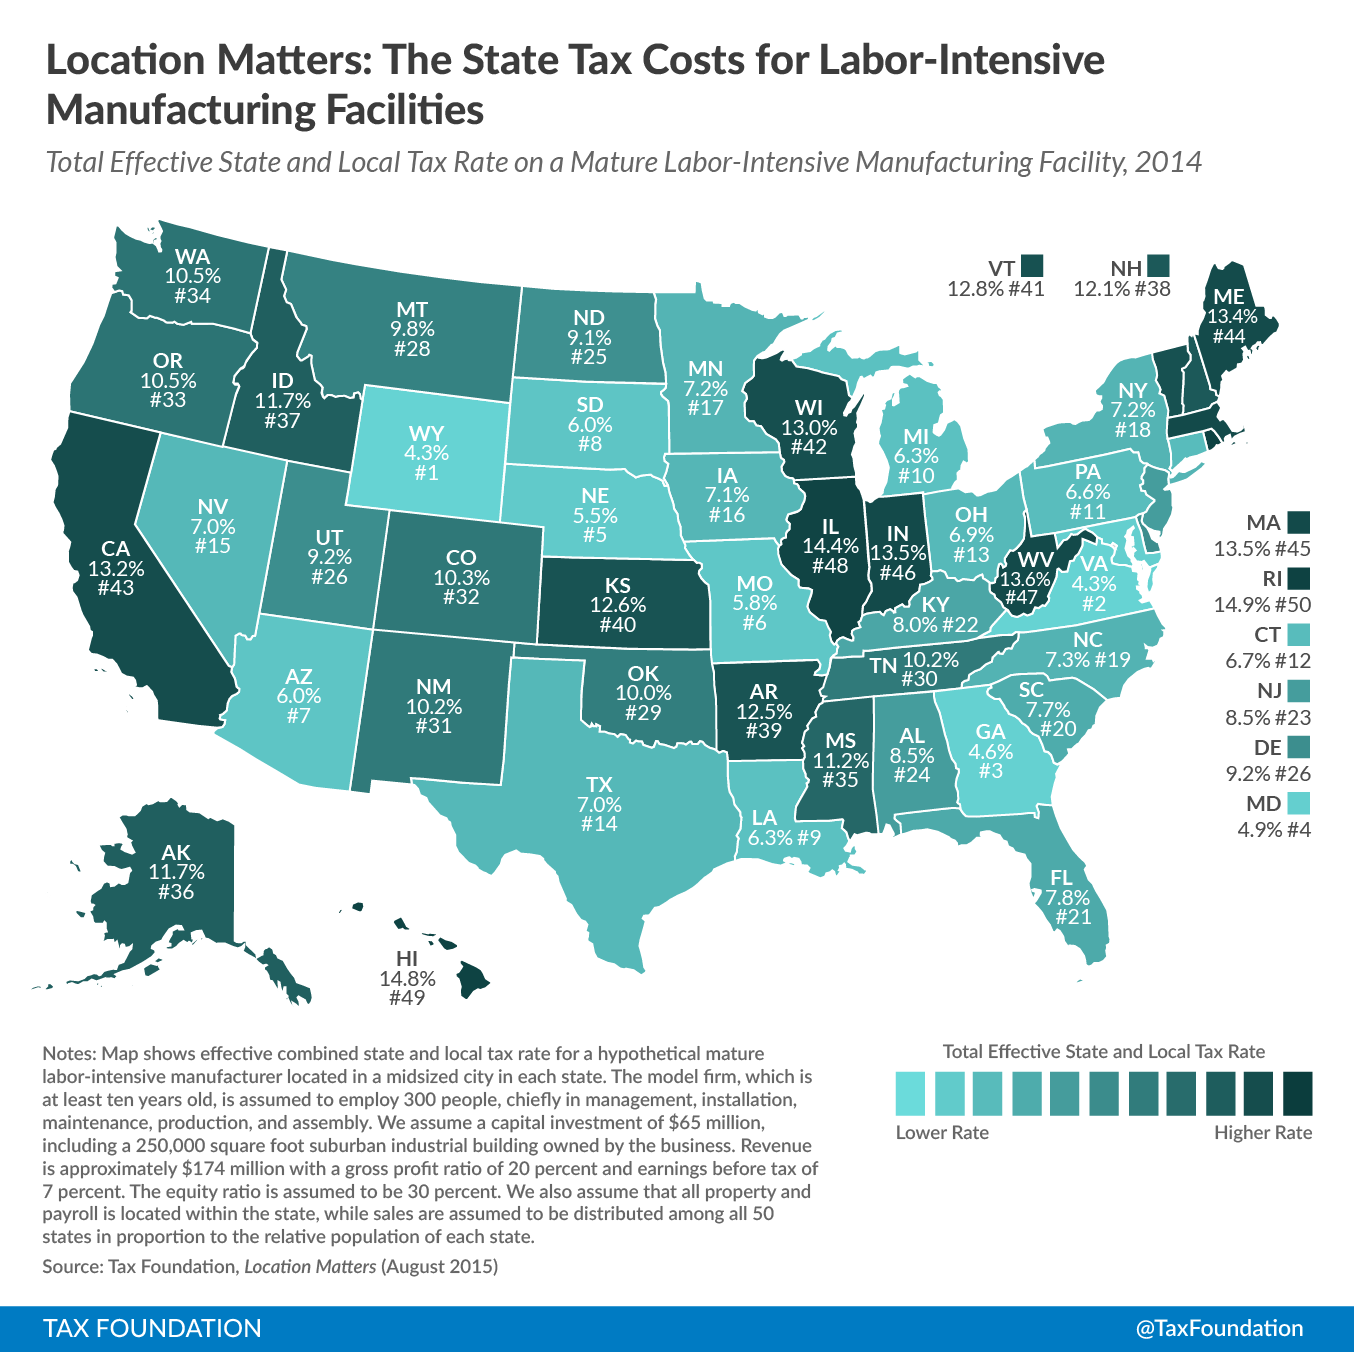 Location Matters - Labor-Intensive Manufacturers